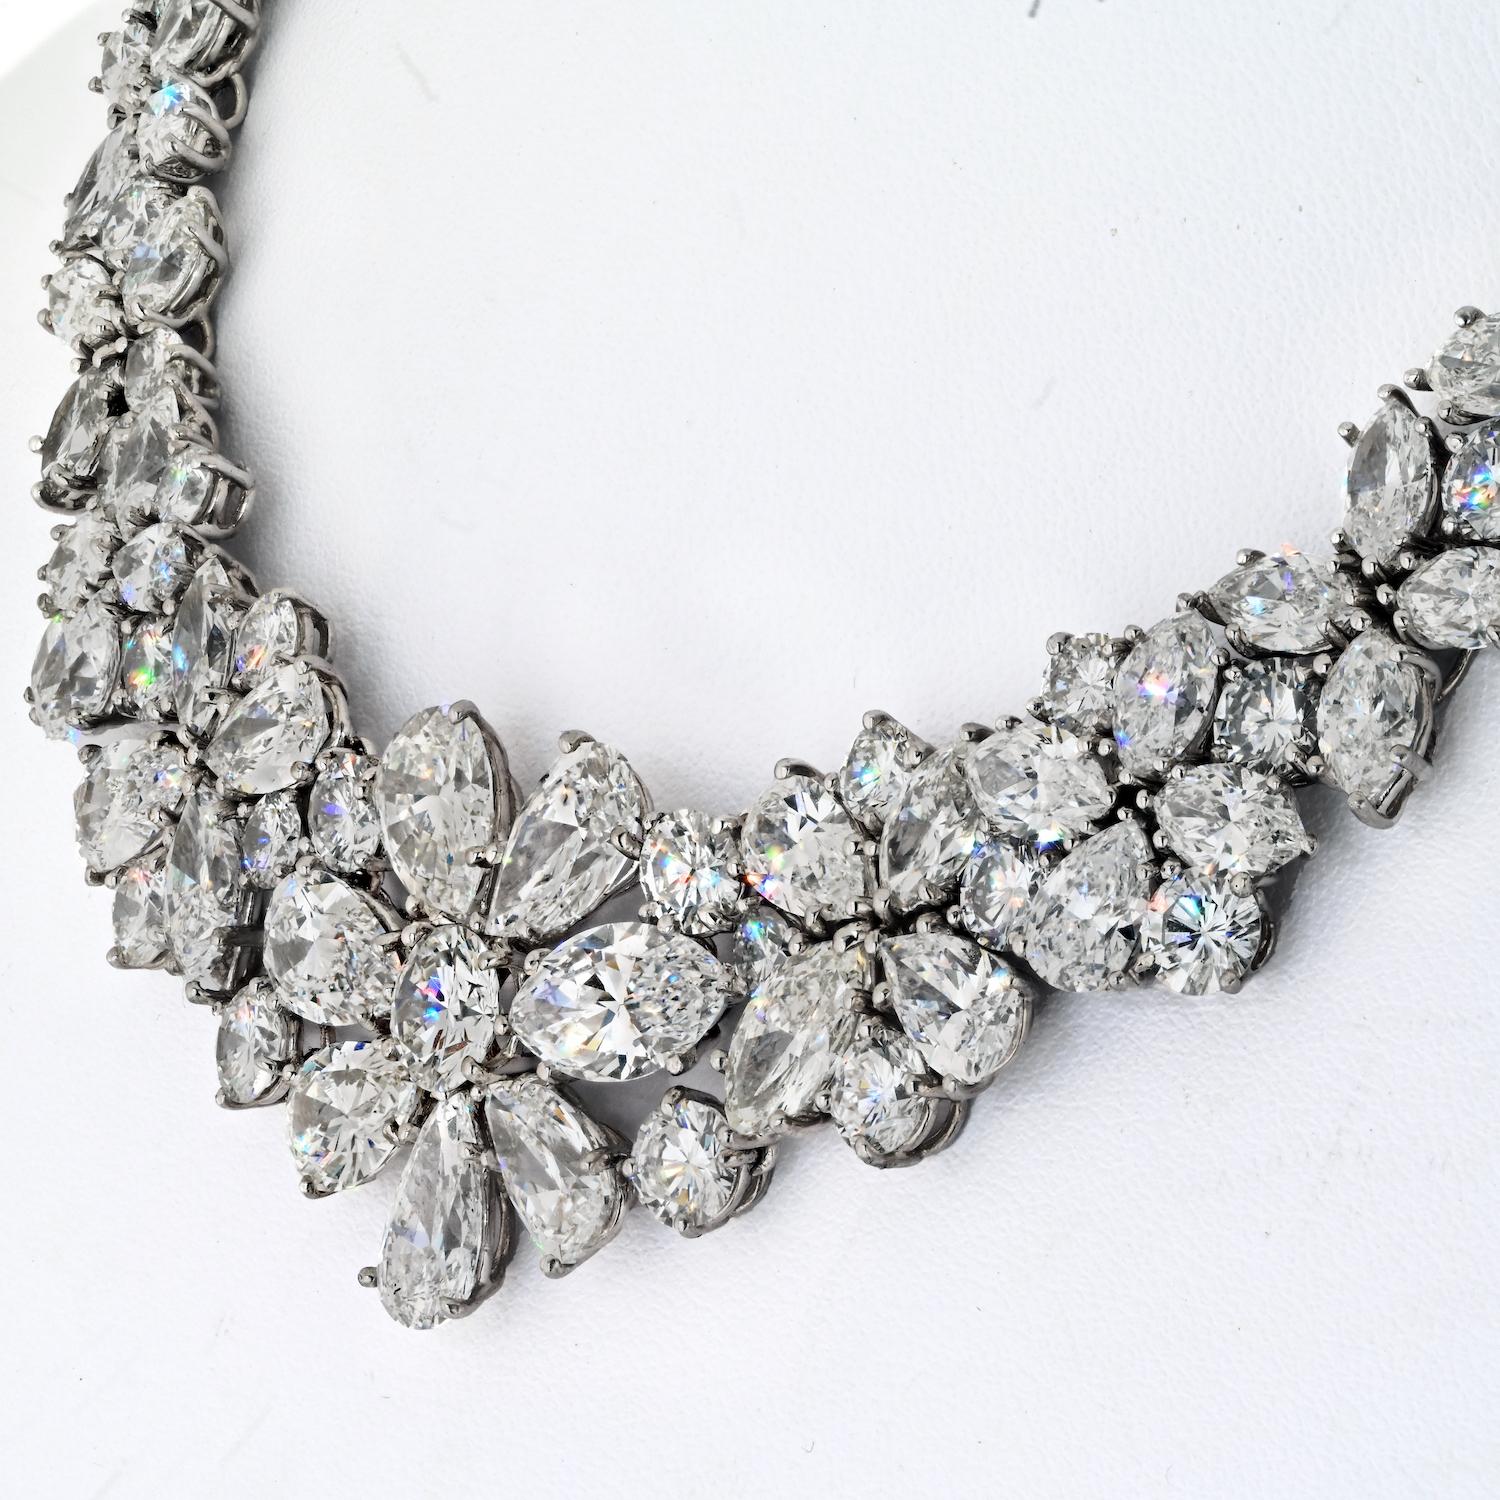 76 Carat Pear Cut, Marquise Cut, and Round Cut Diamond Collar Platinum Necklace For Sale 5